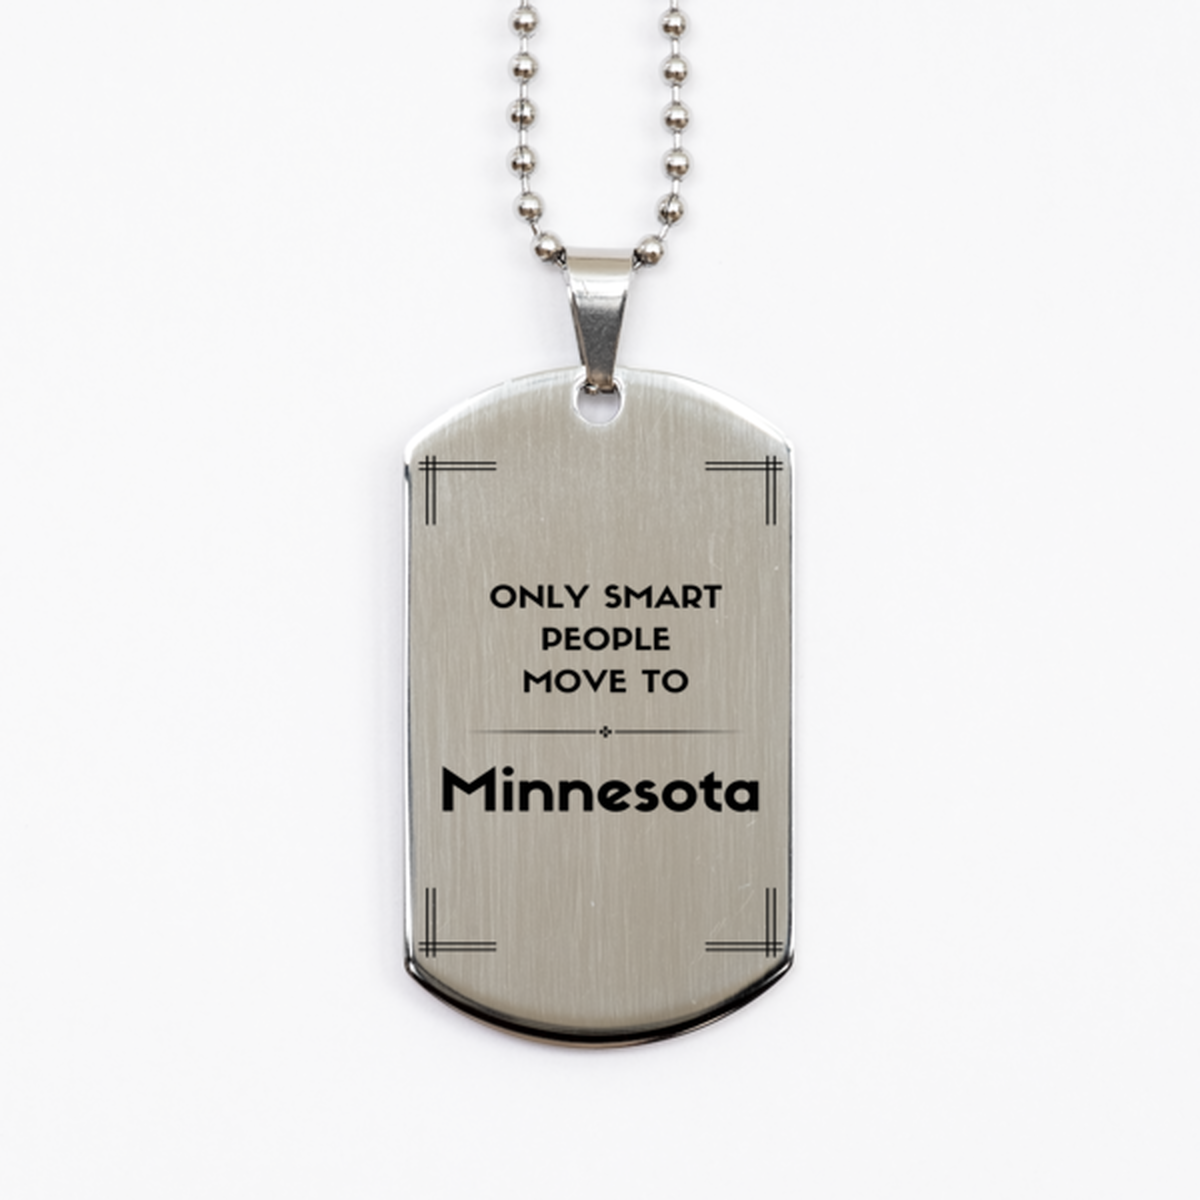 Only smart people move to Minnesota Silver Dog Tag, Gag Gifts For Minnesota, Move to Minnesota Gifts for Friends Coworker Funny Saying Quote